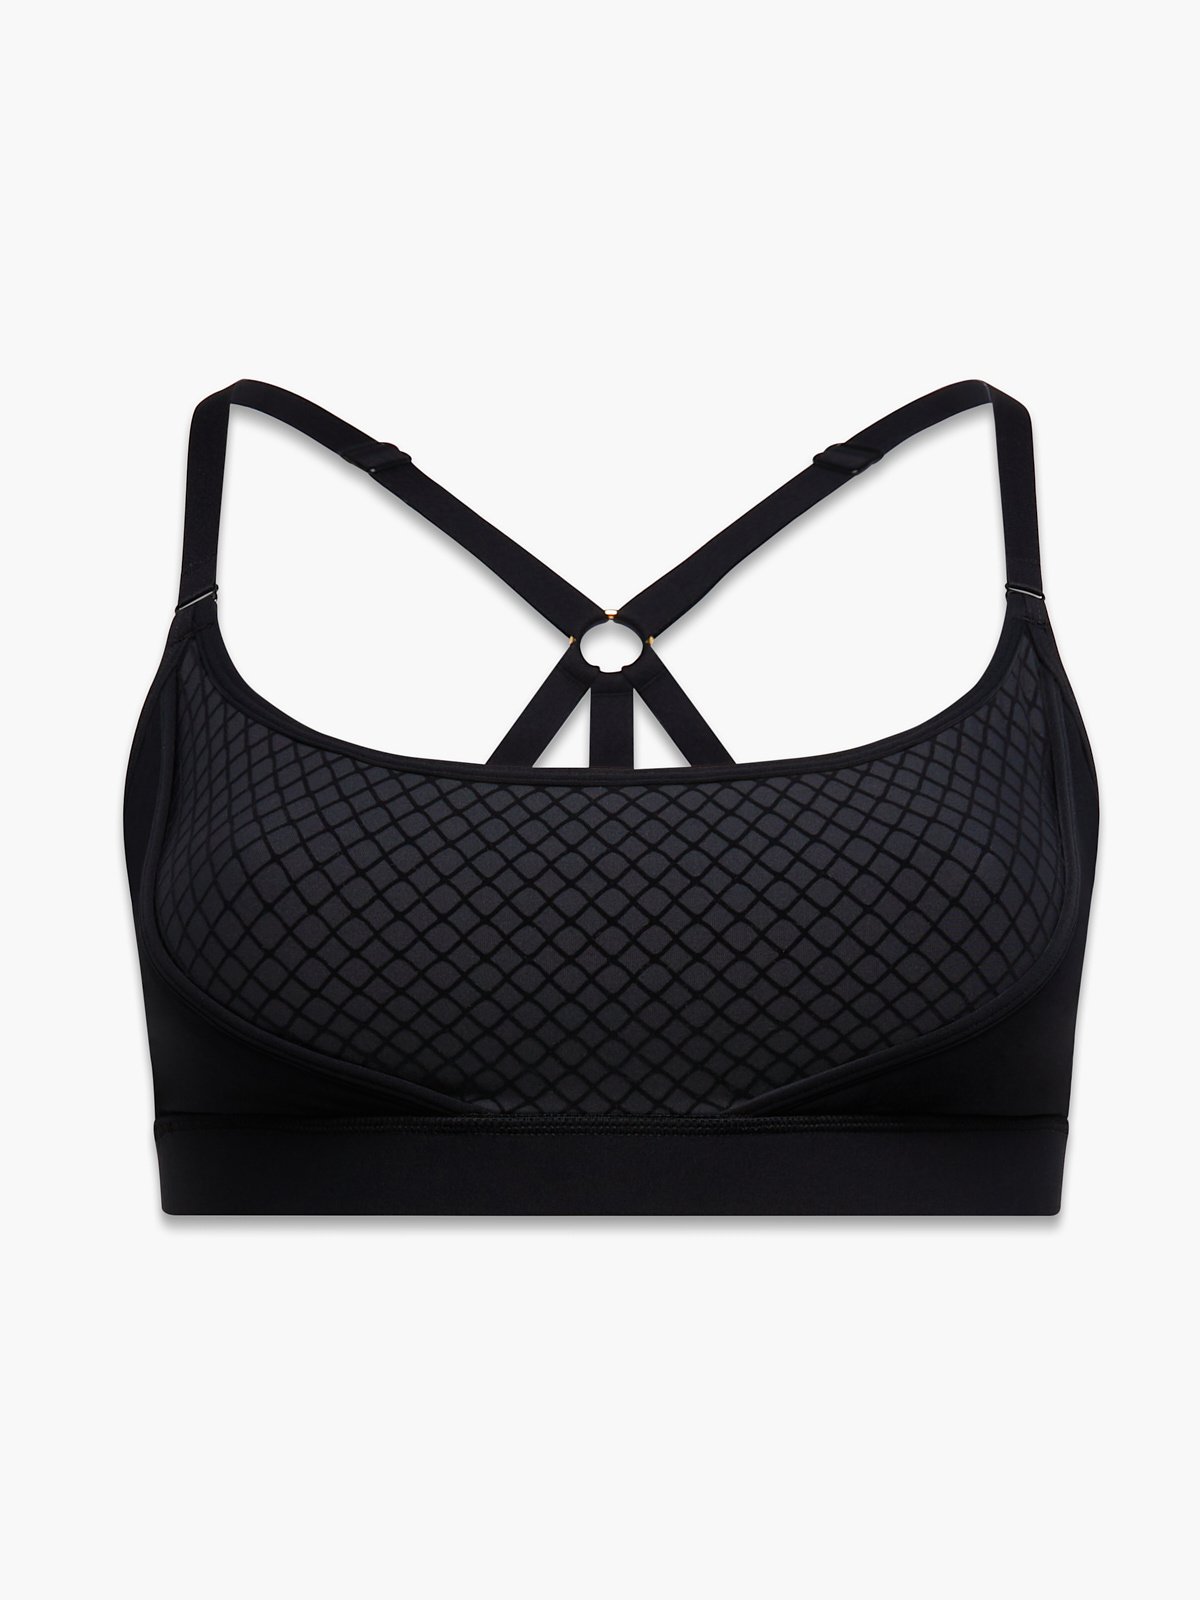 Champion Black Grey Strappy Back Sports Bra Women's Size Extra Small XS -  $11 - From Taylor